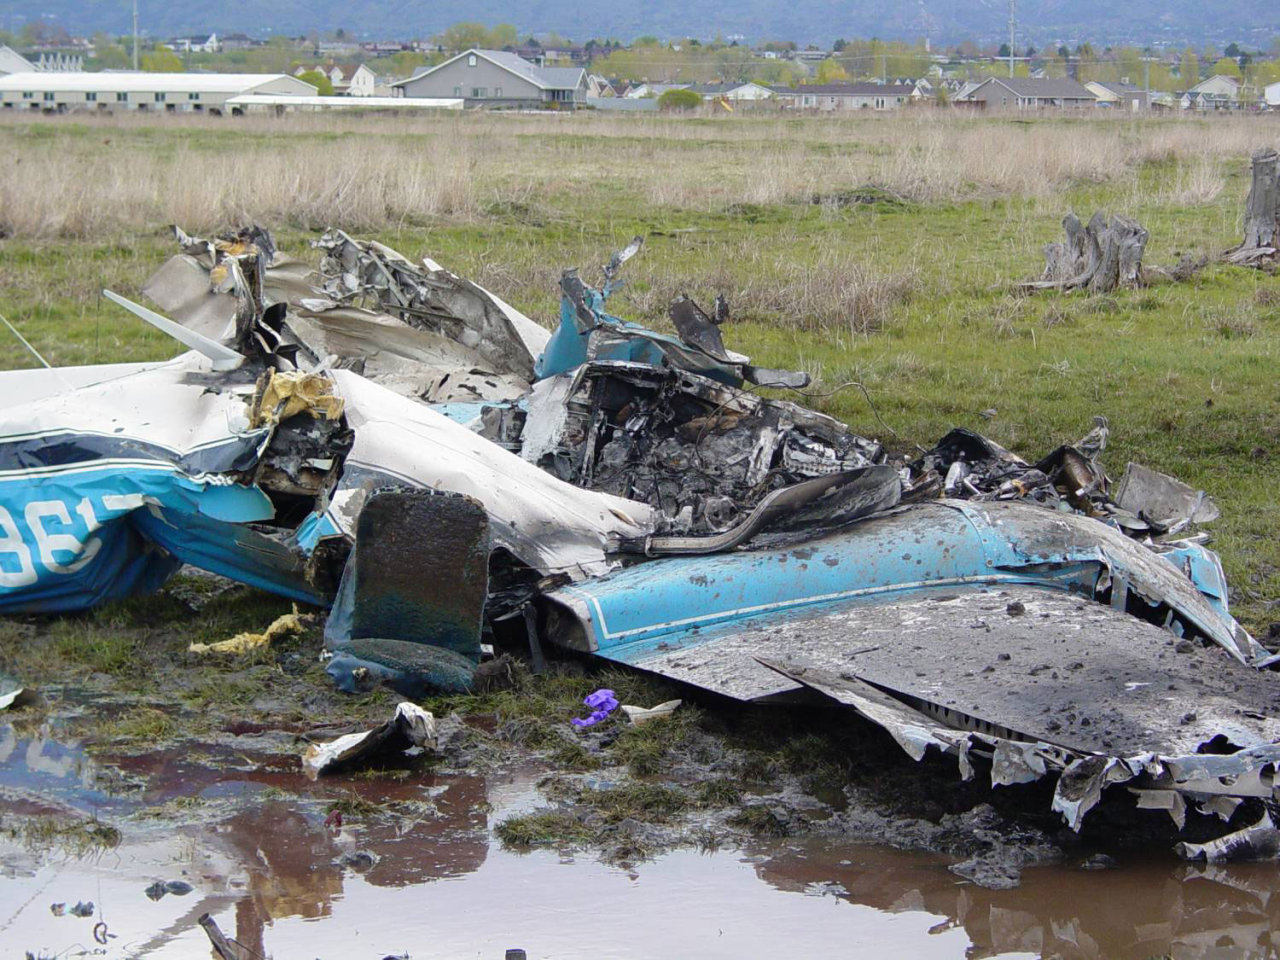 Government commission created to investigate causes of plane crash in Kazakhstan